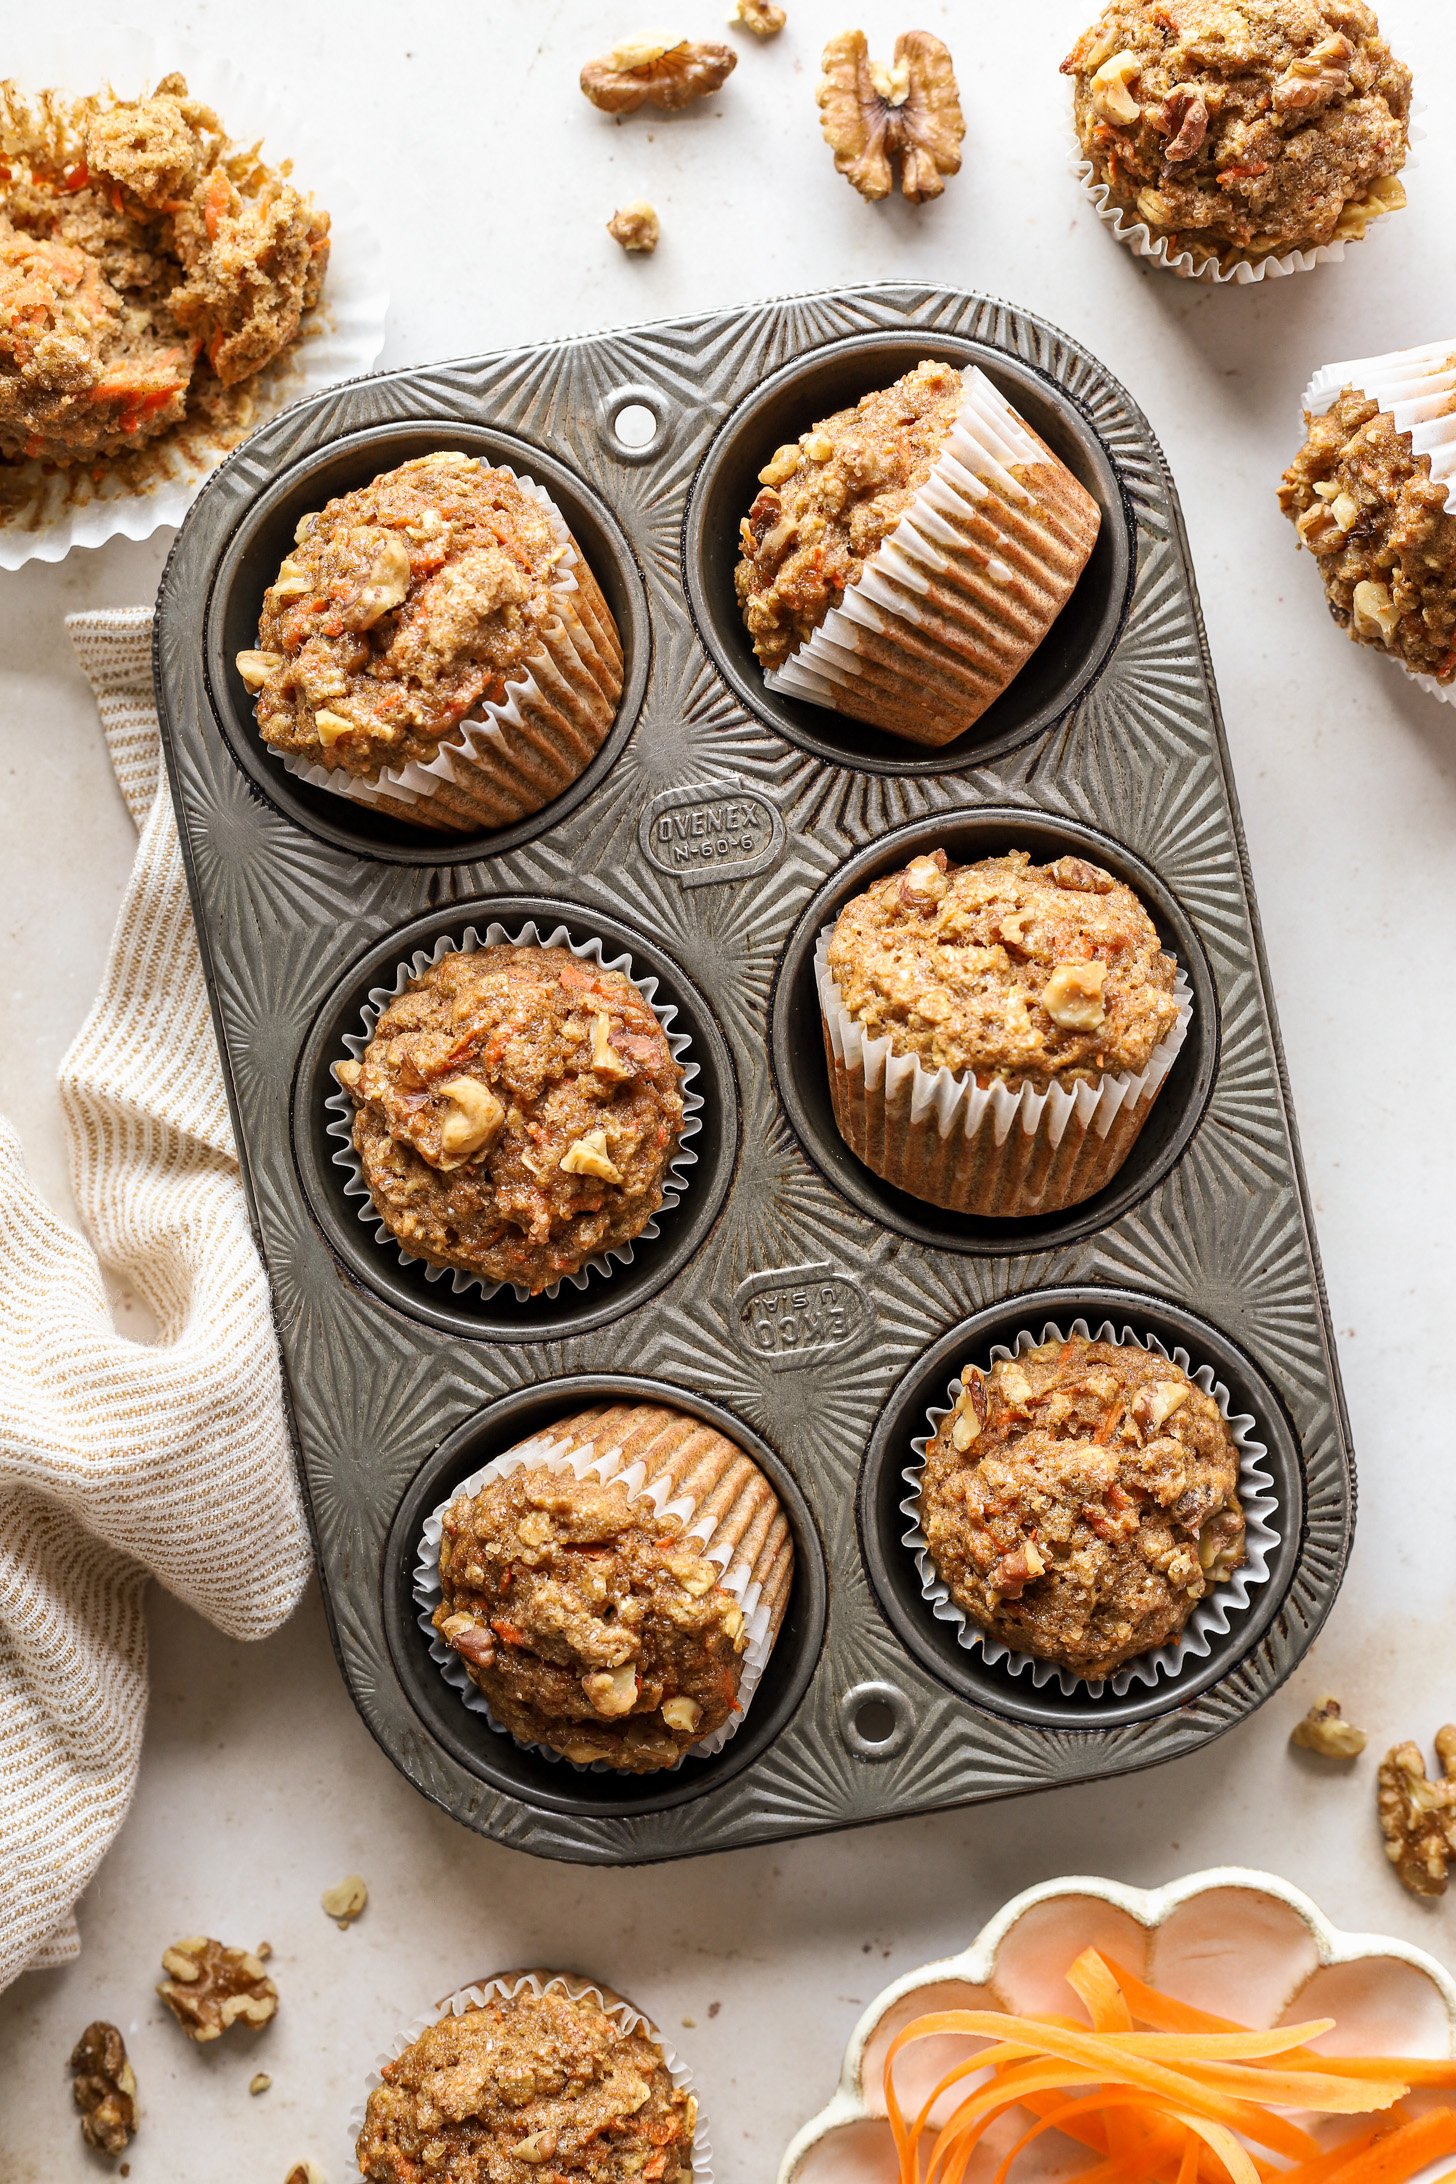 Healthy oatmeal carrot muffins in a muffin tin after baking. There are a few muffins on the counter around the tin and a striped napkin until the muffin tin.